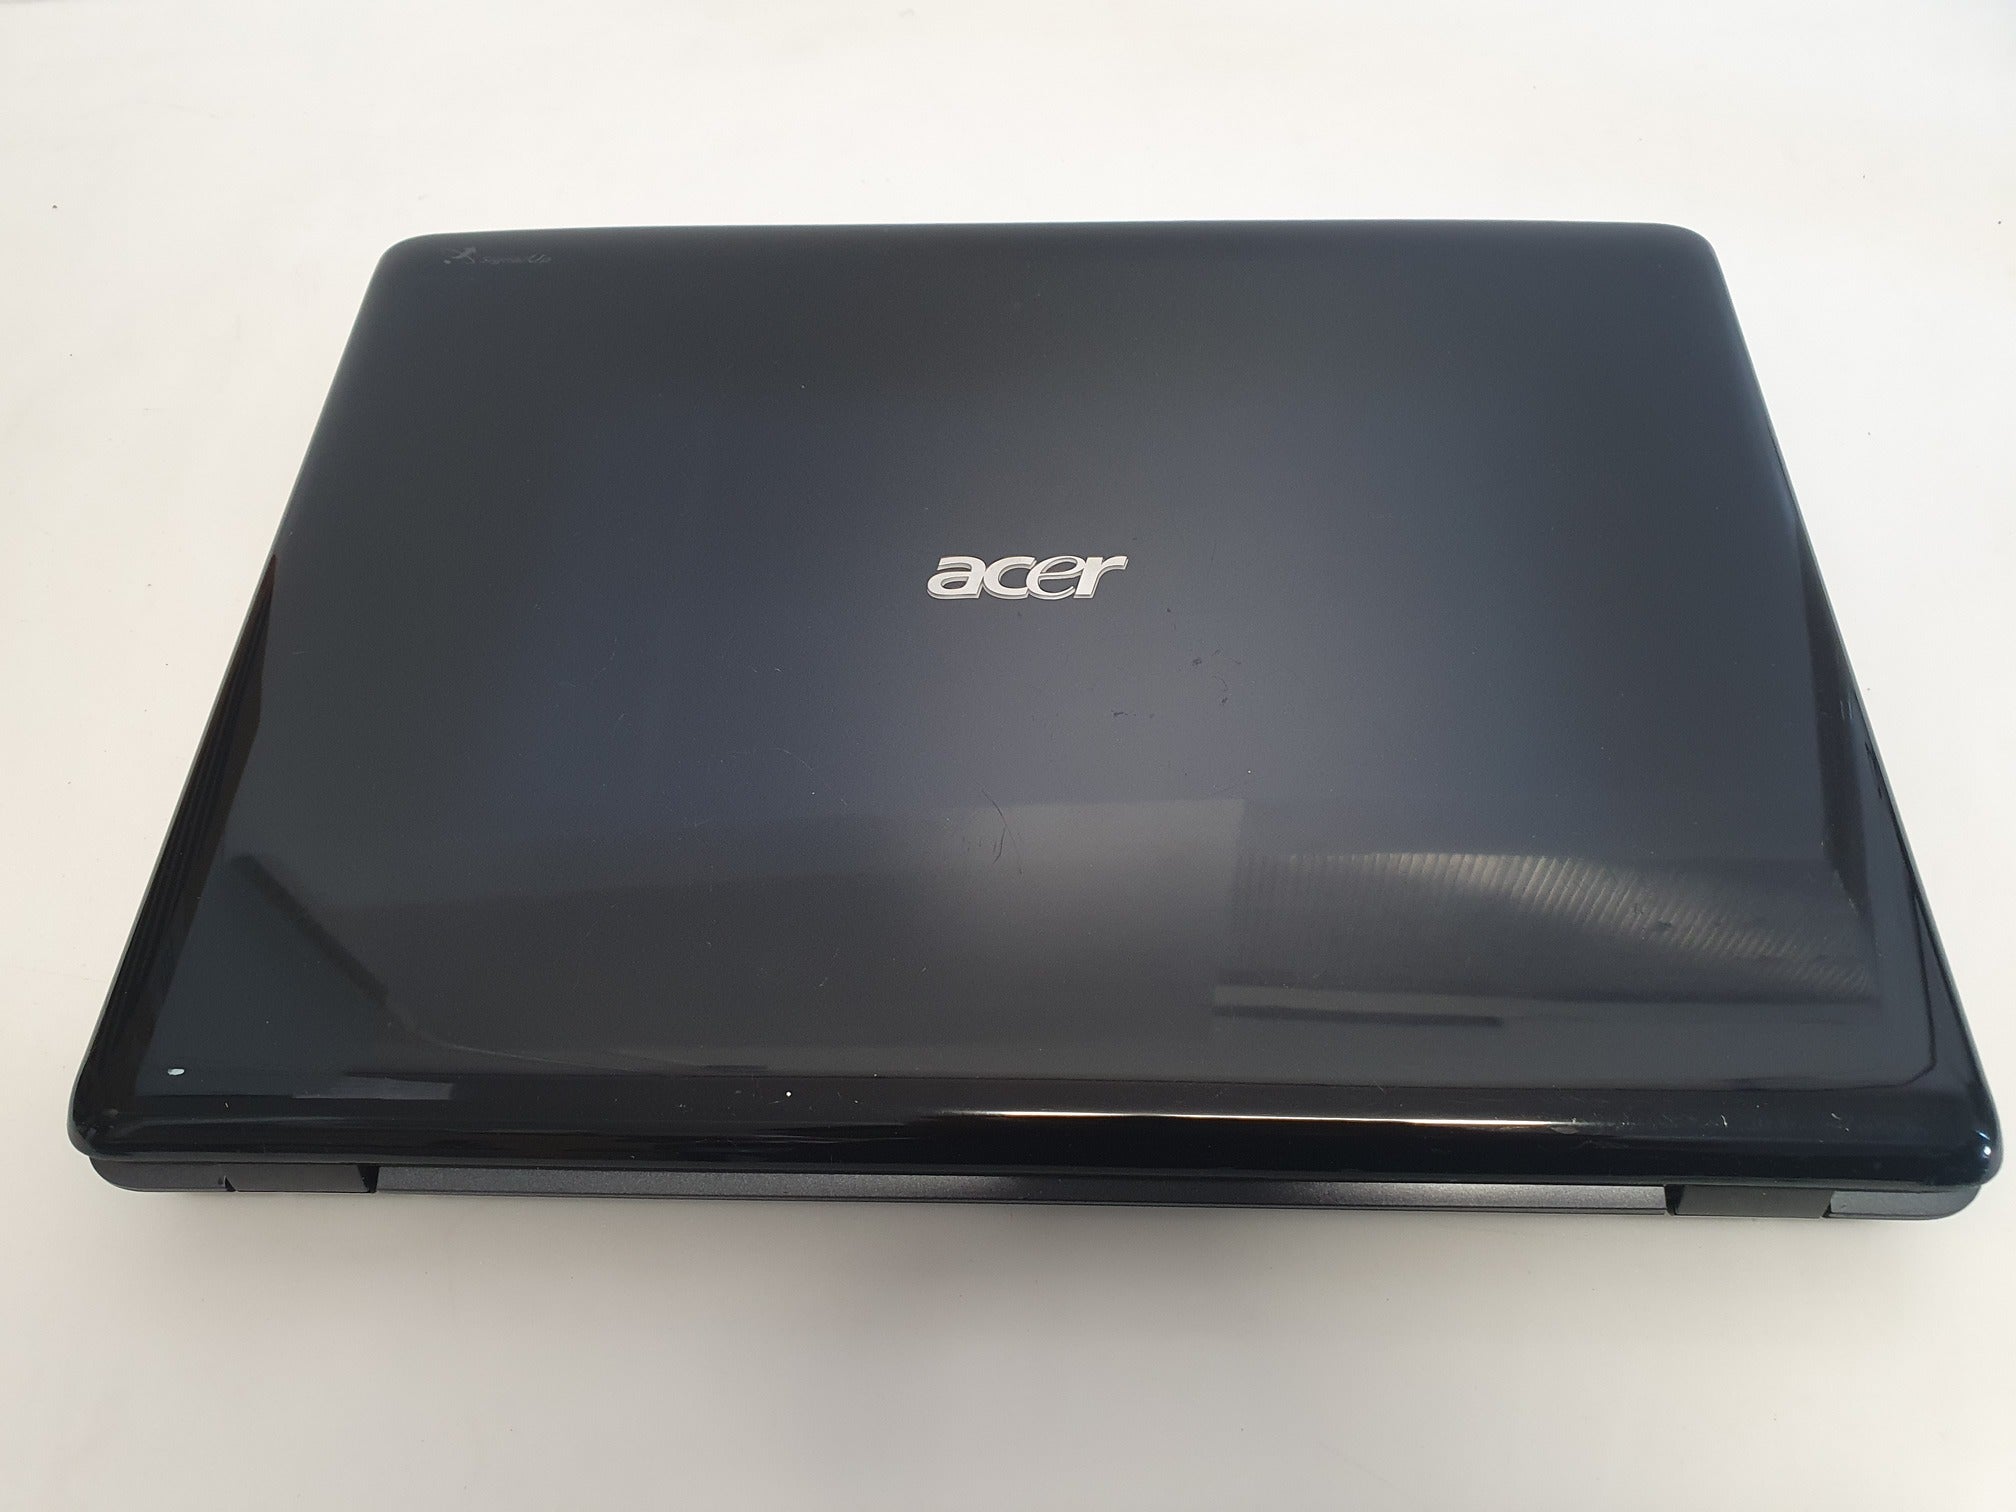 Acer Aspire 7730ZG notebook /17 inches/ Pentium T3400/3 GB/320 GB HDD